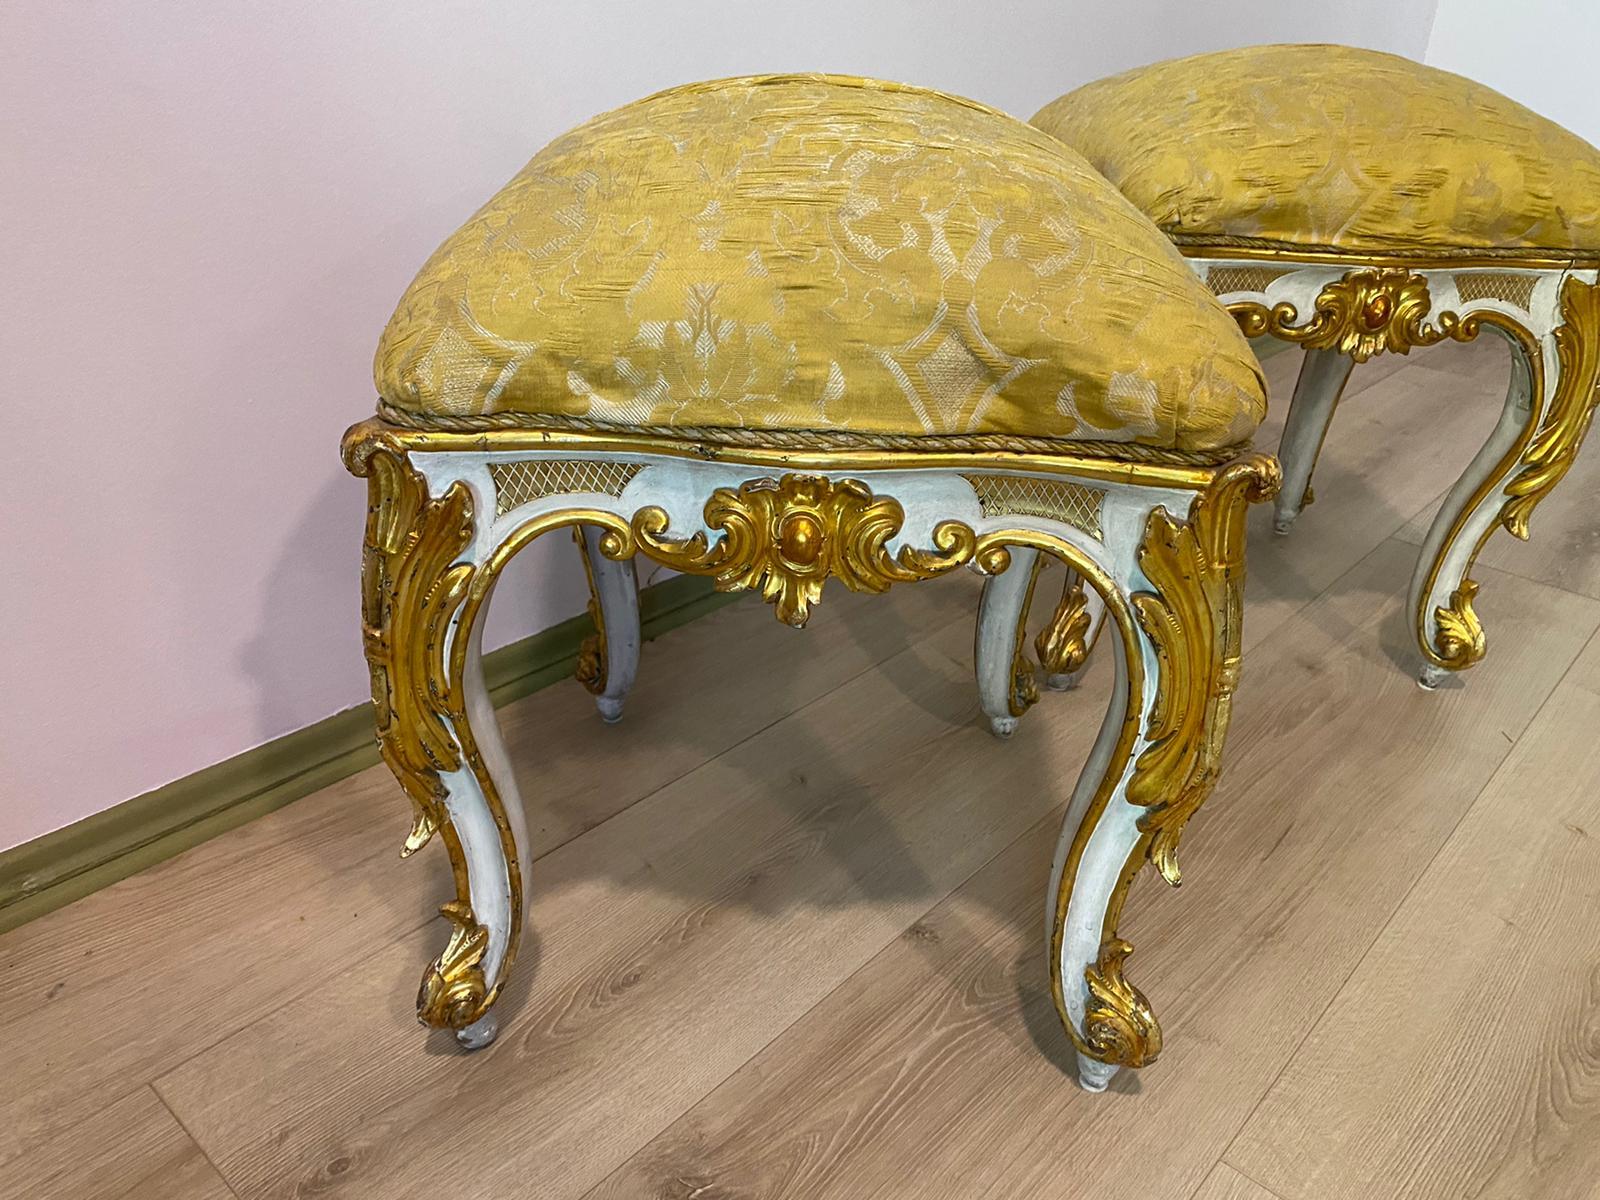 Two Magnificent French Armchairs with respective Stools early 19th Century
armchair measurements: H: 96cm x 76cm c 75cm
stool measures: 45cm x 45cm x 50cm Hight
wood and italian silk
perfect condition